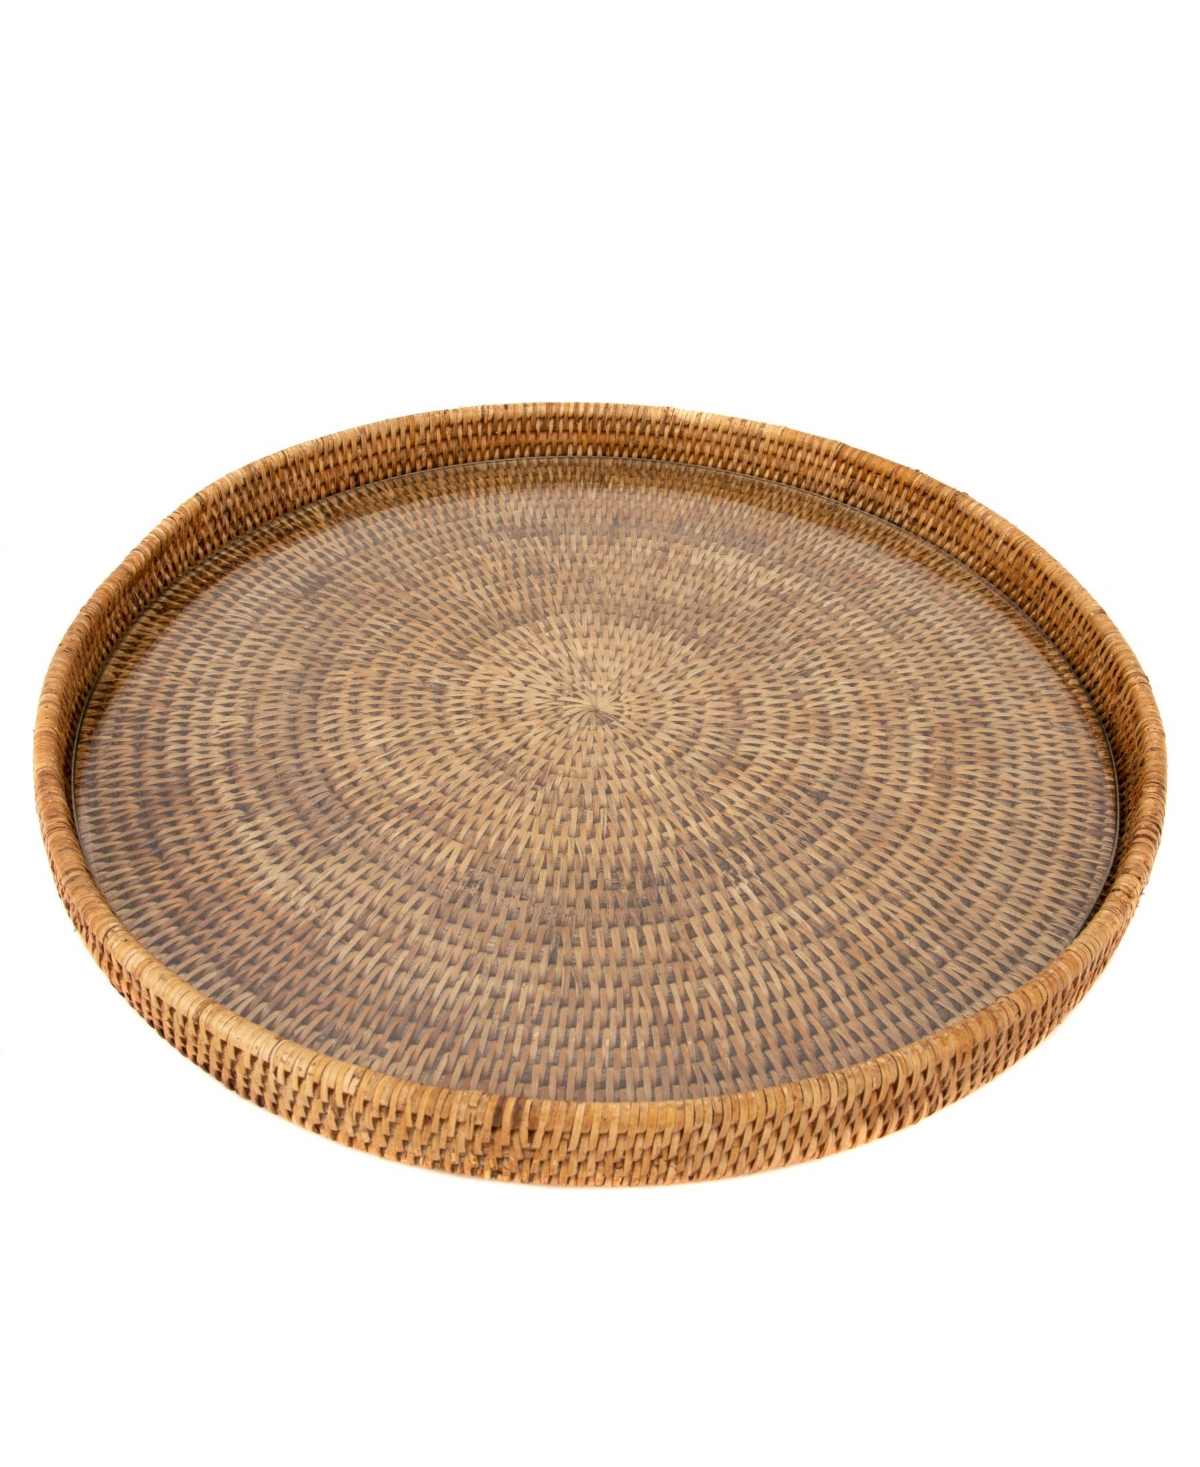 Artifacts Trading Company Artifacts Rattan Round Serving-ottoman Tray With Glass Insert In Medium Brown